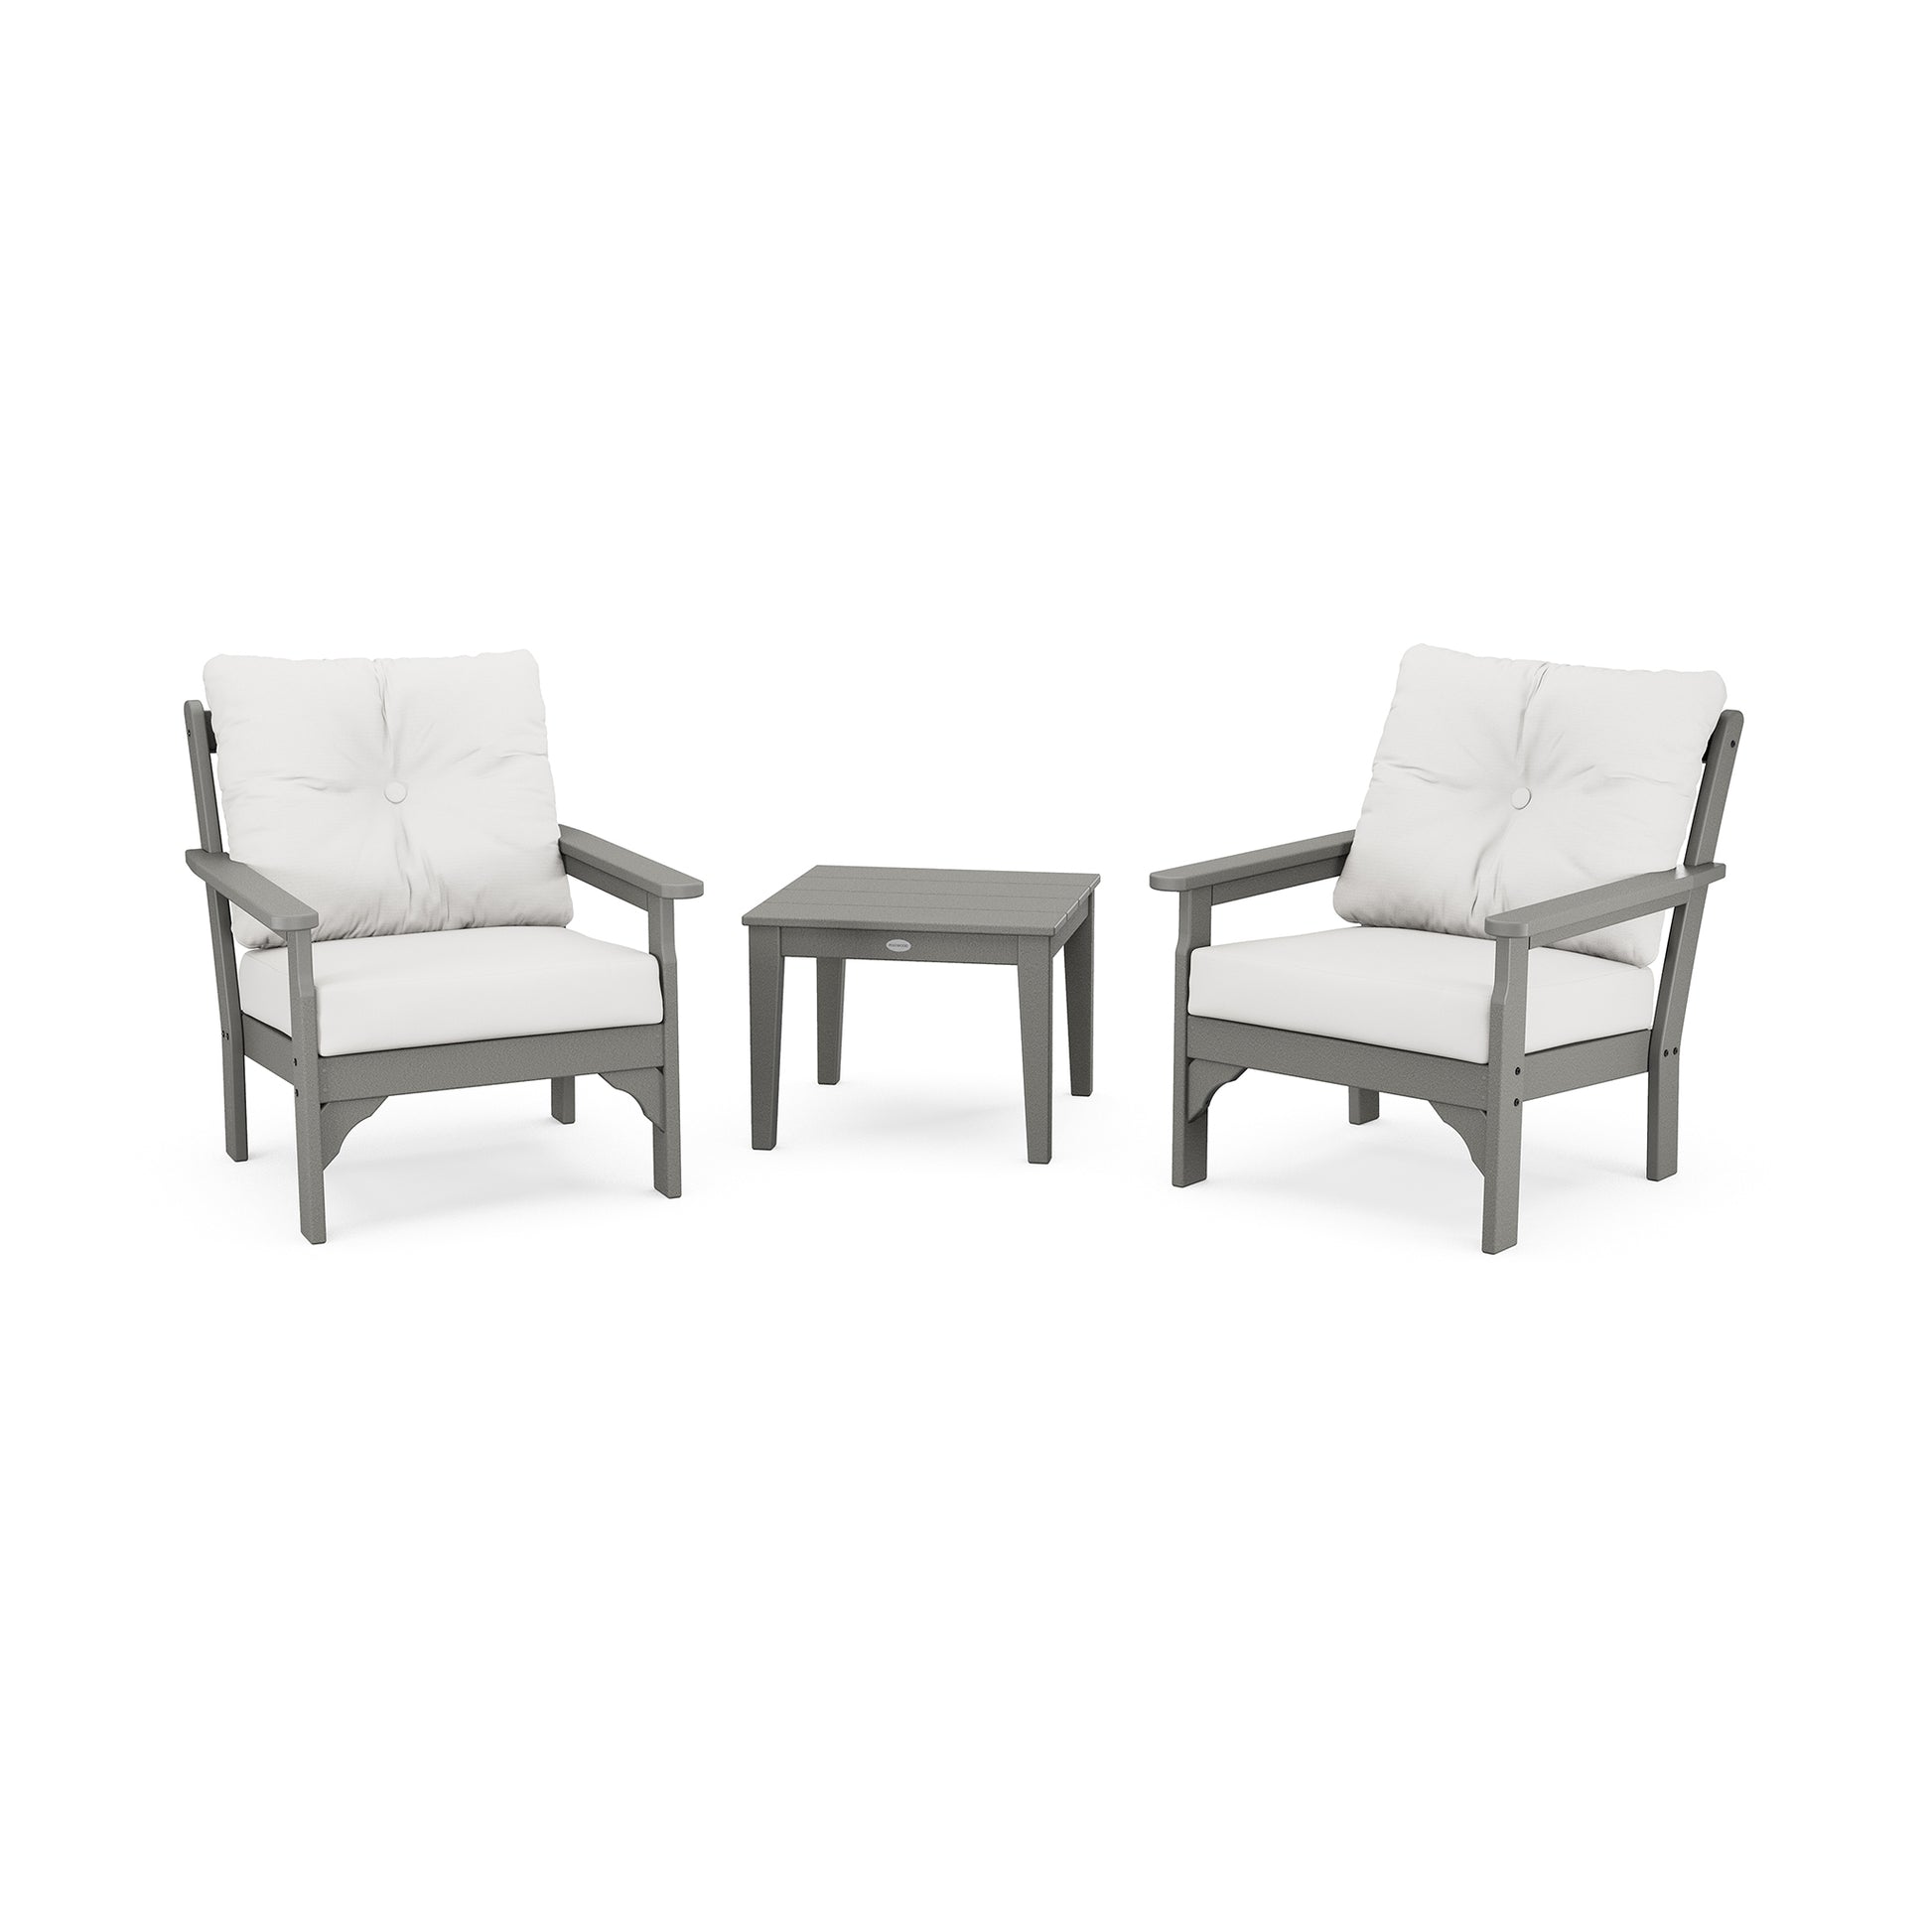 Two gray POLYWOOD Vineyard 3-Piece Deep Seating Sets with white deep seating cushions positioned on either side of a small matching gray table, all against a plain white background.